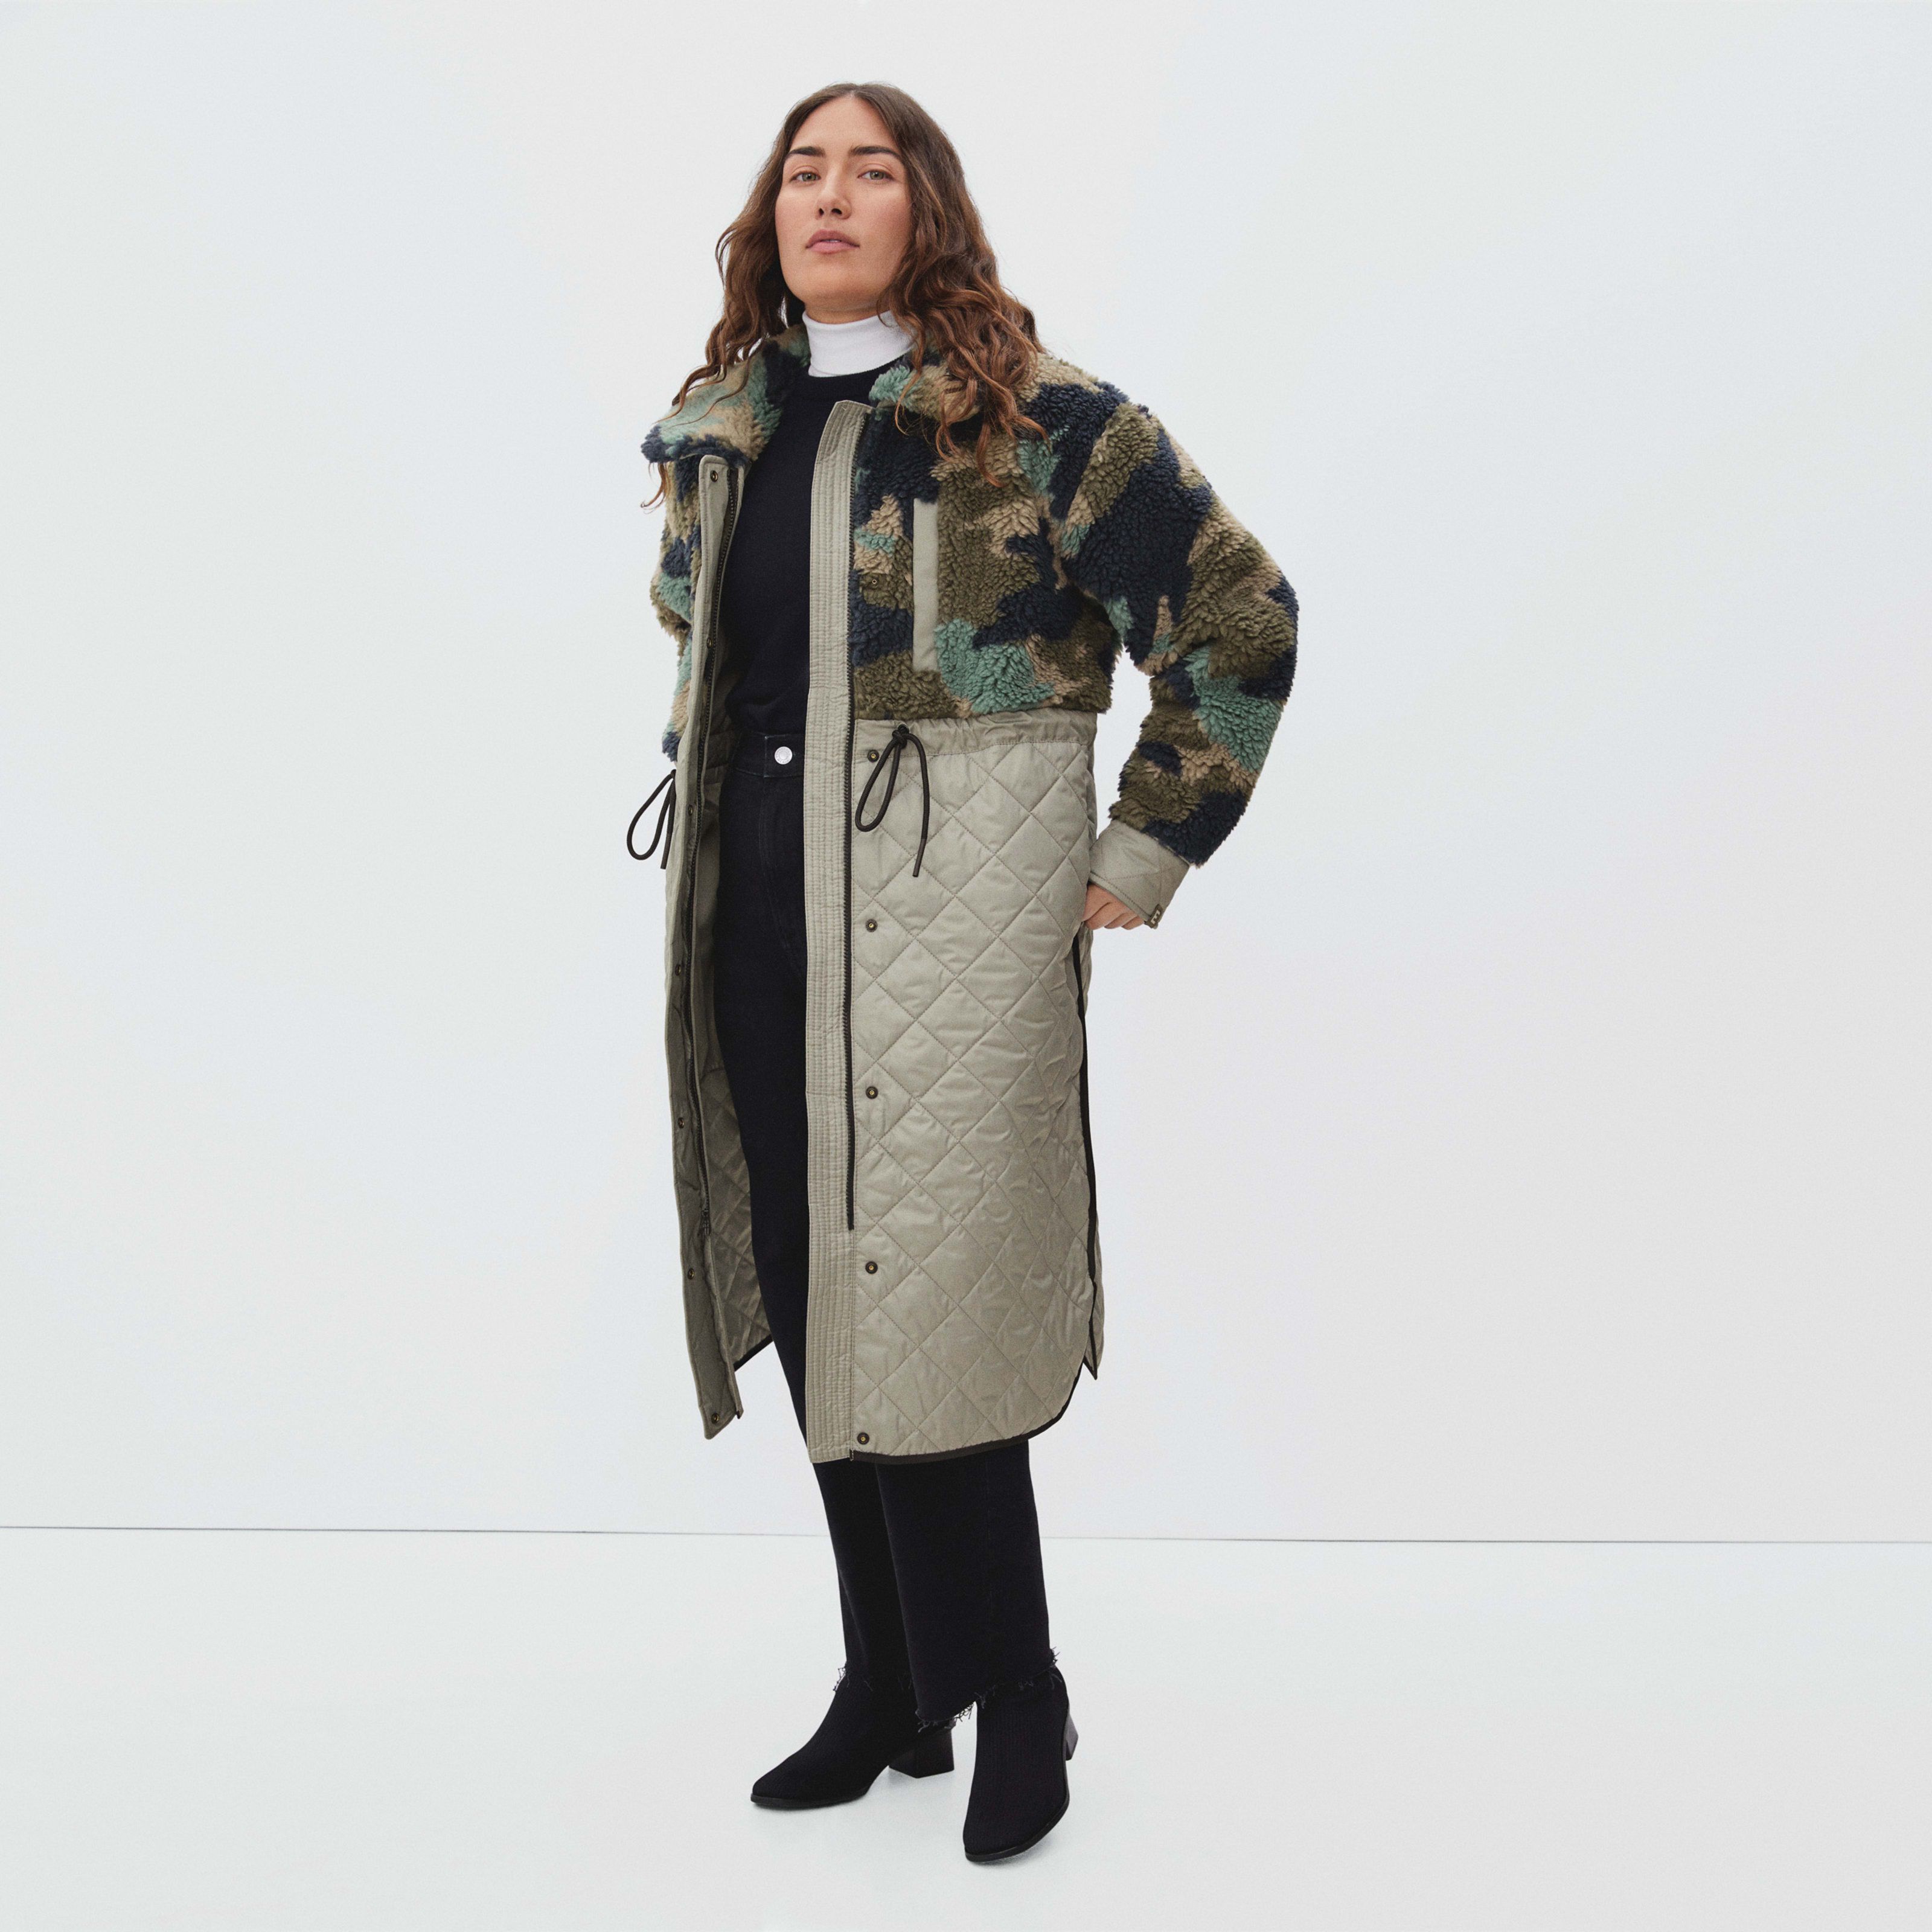 Women's Quilted Teddy Coat by Everlane in Camo, Size M | Everlane